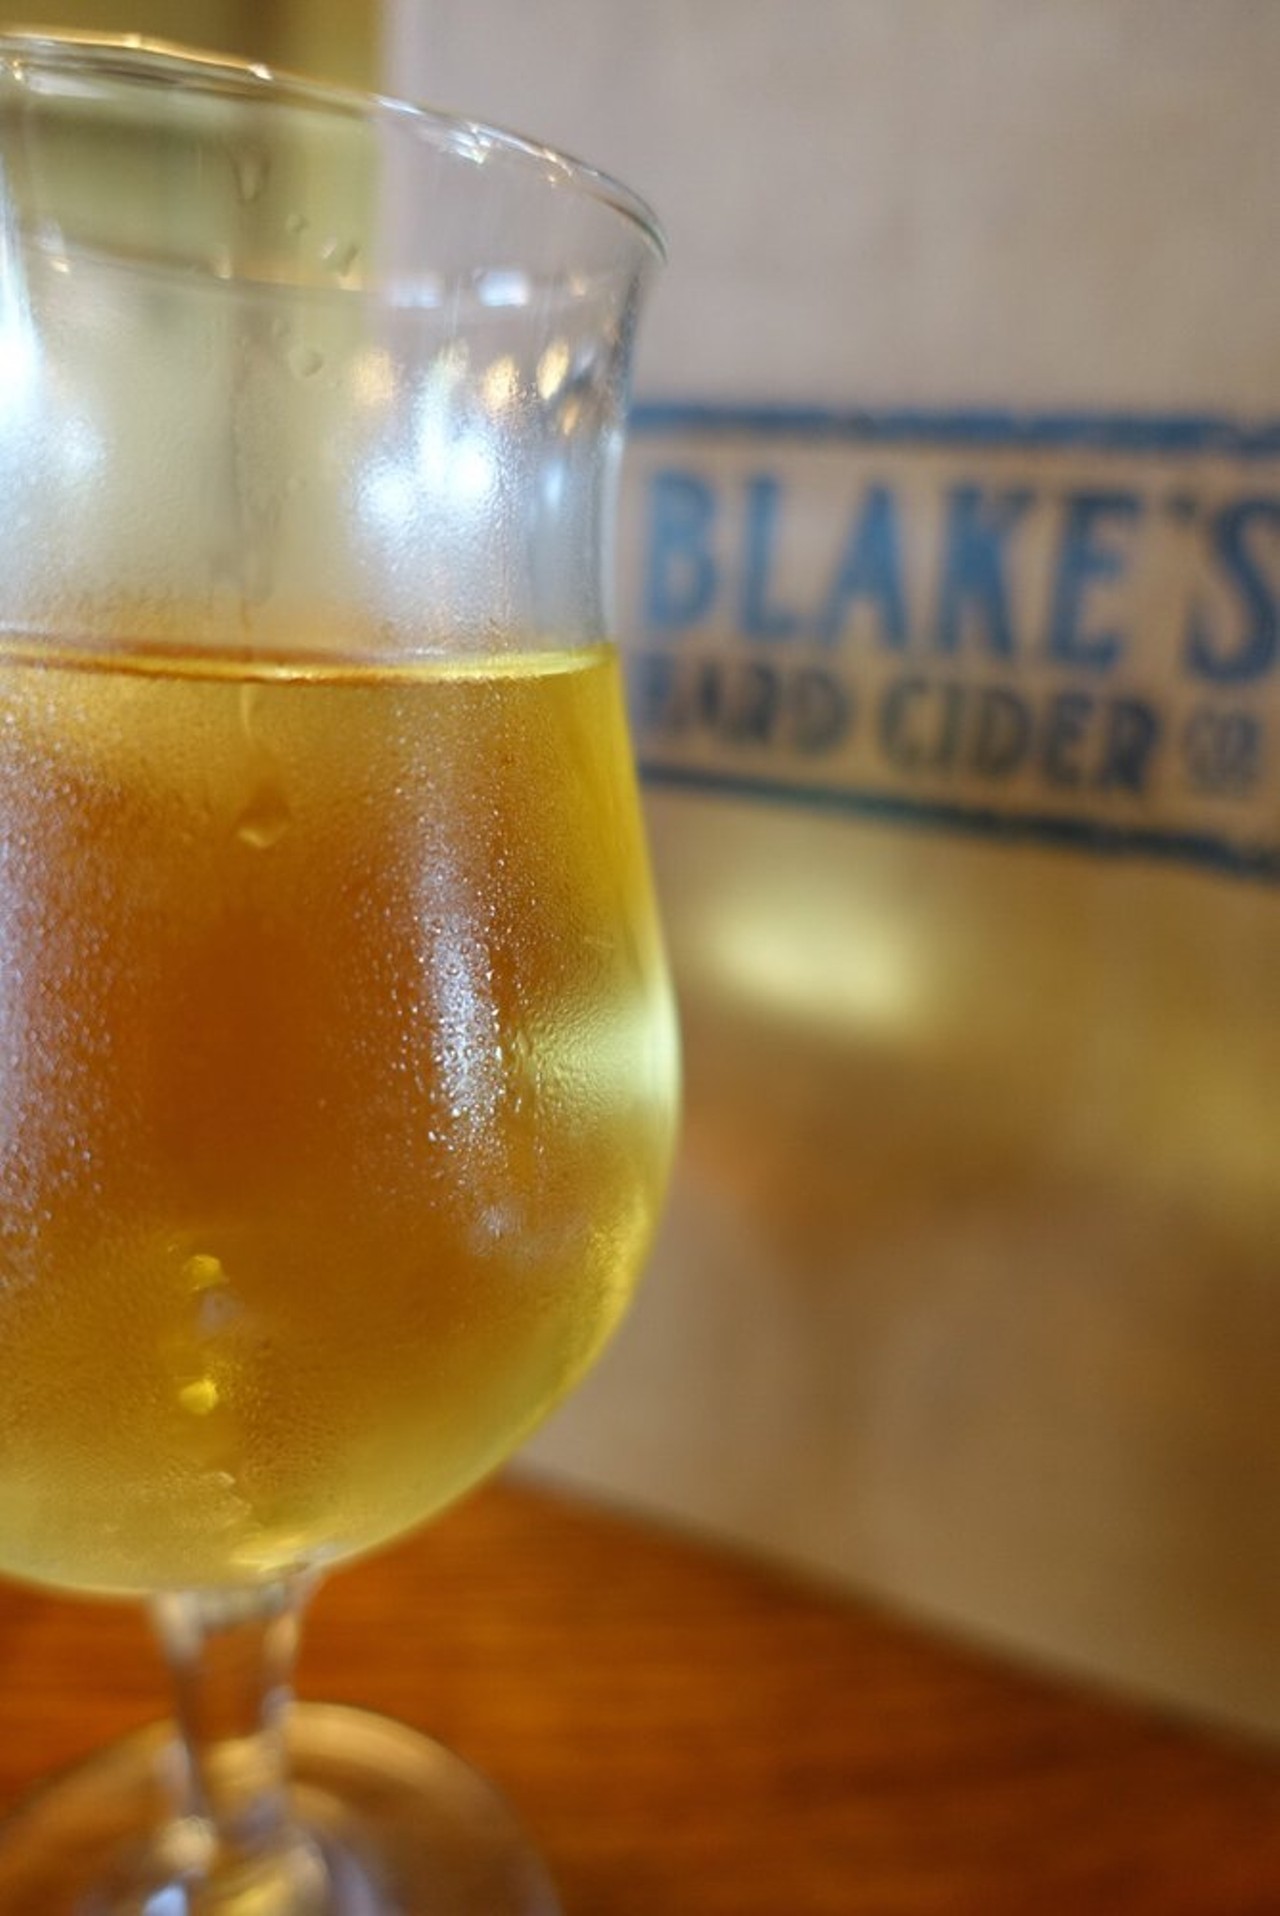 Flannel Mouth
6.5% ABV
This is the original hard cider from Blake's. Just a classic hard cider: sweet enough to make you want more and tart enough to make you pucker just the slightest.